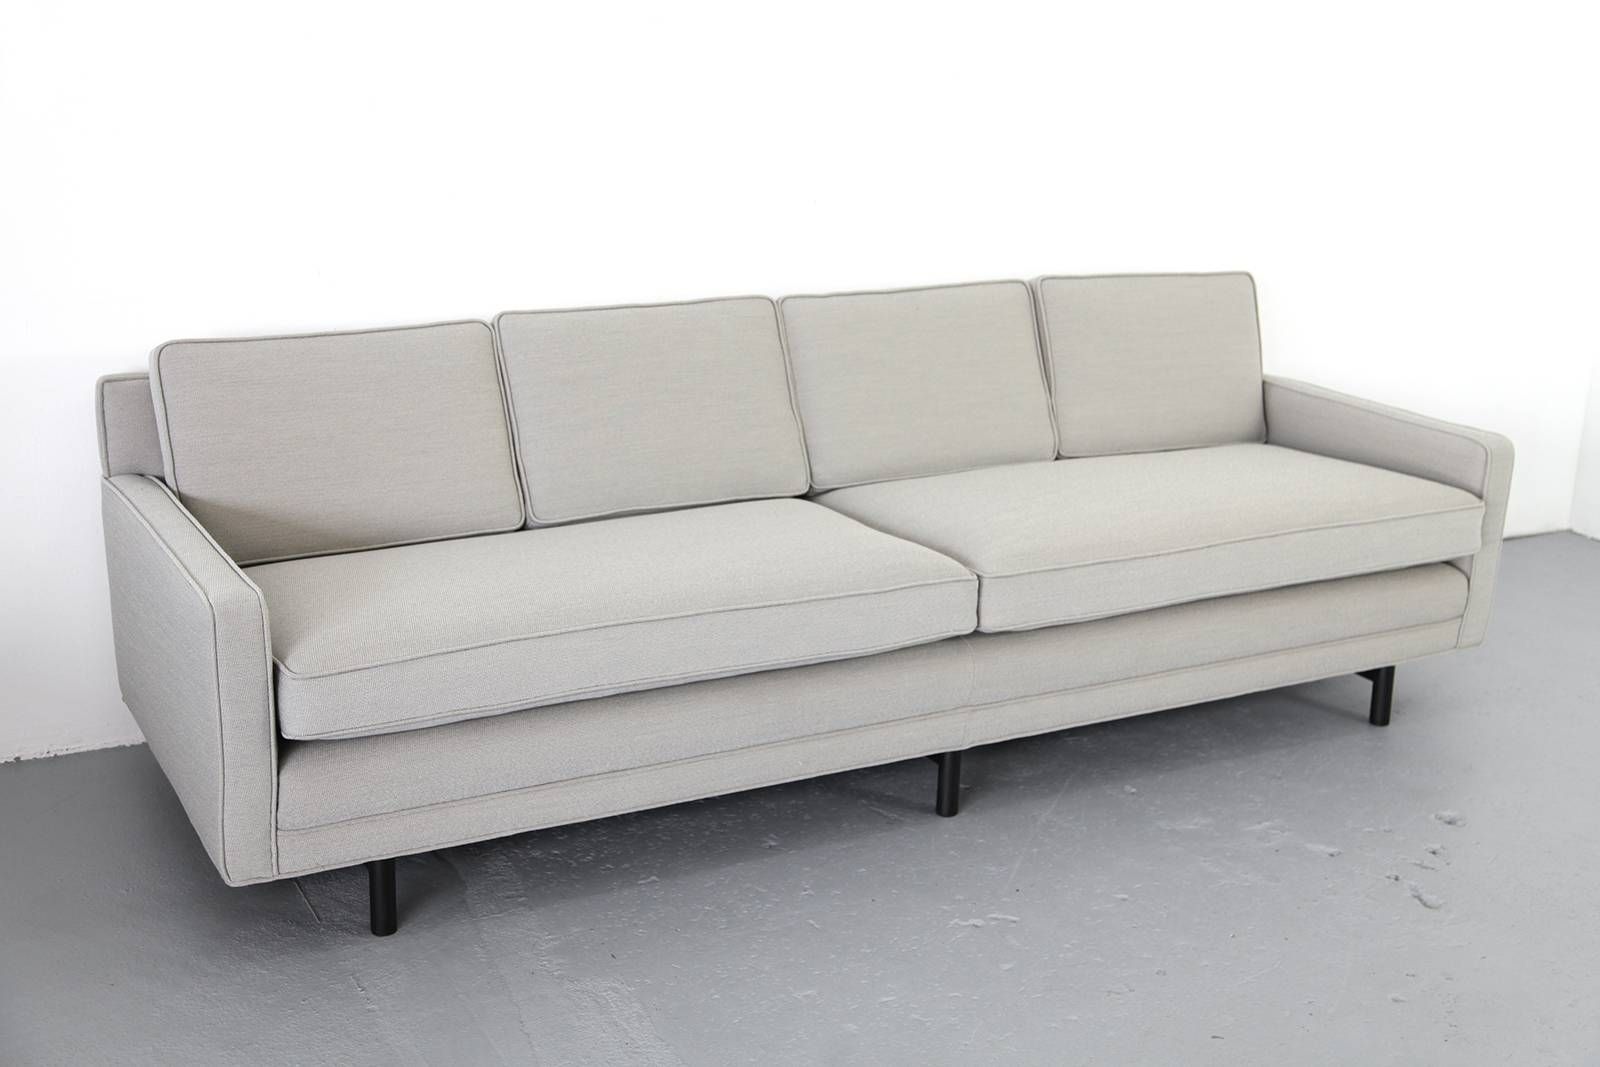 4 Seater Sofapaul Mccobb For Directional For Sale At Pamono Pertaining To 4 Seater Sofas (View 13 of 30)